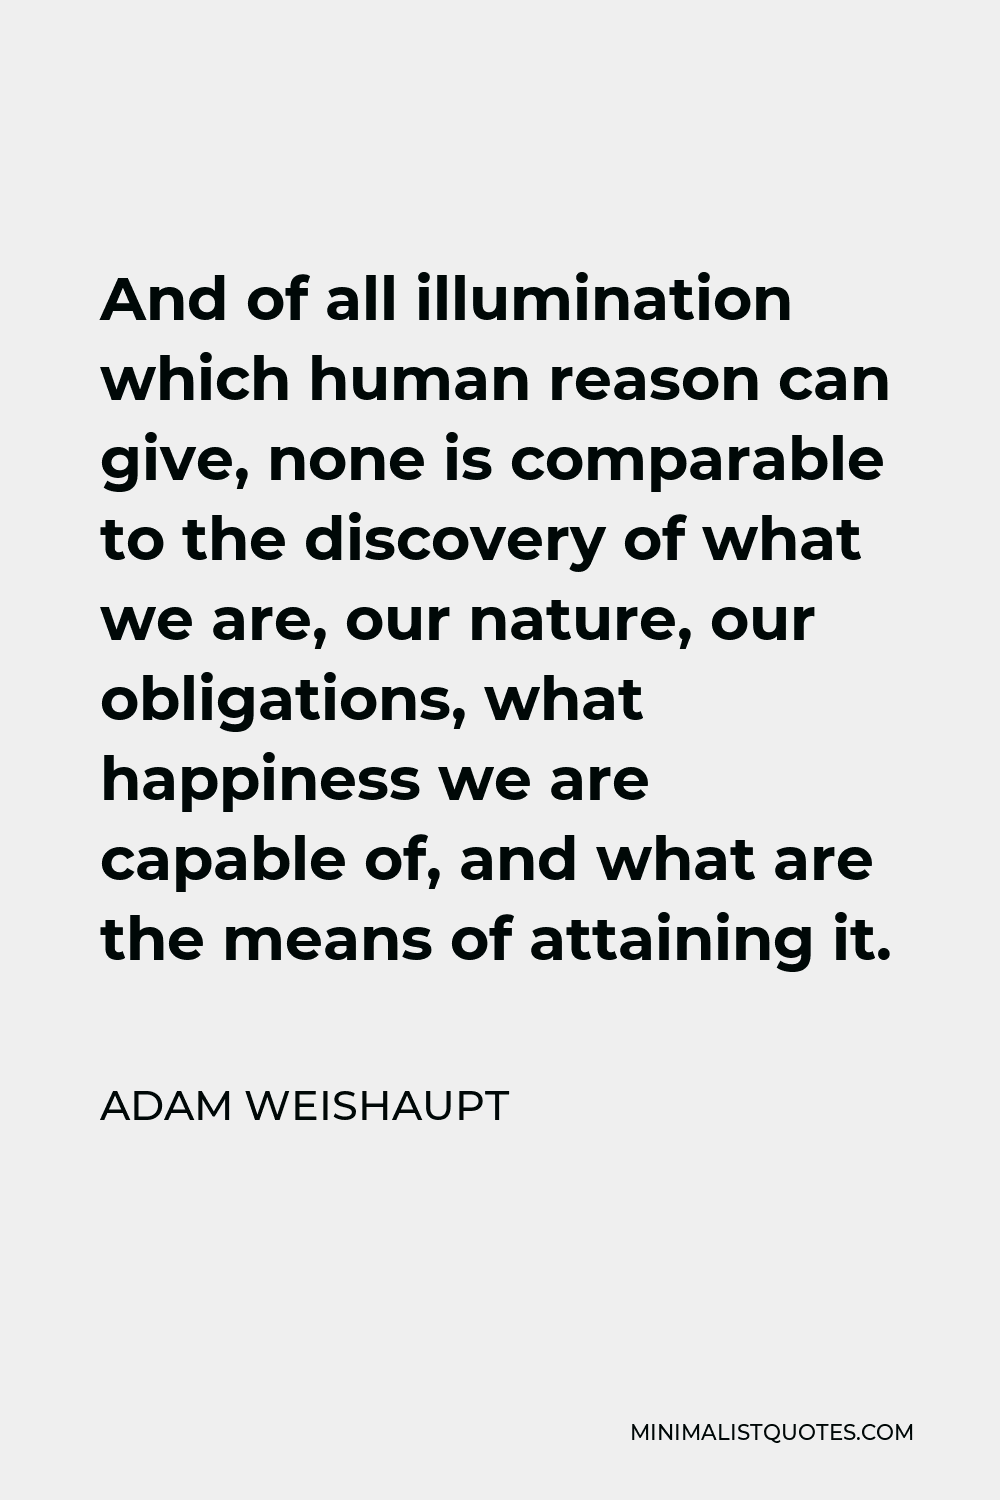 Adam Weishaupt Quote - And of all illumination which human reason can give, none is comparable to the discovery of what we are, our nature, our obligations, what happiness we are capable of, and what are the means of attaining it.